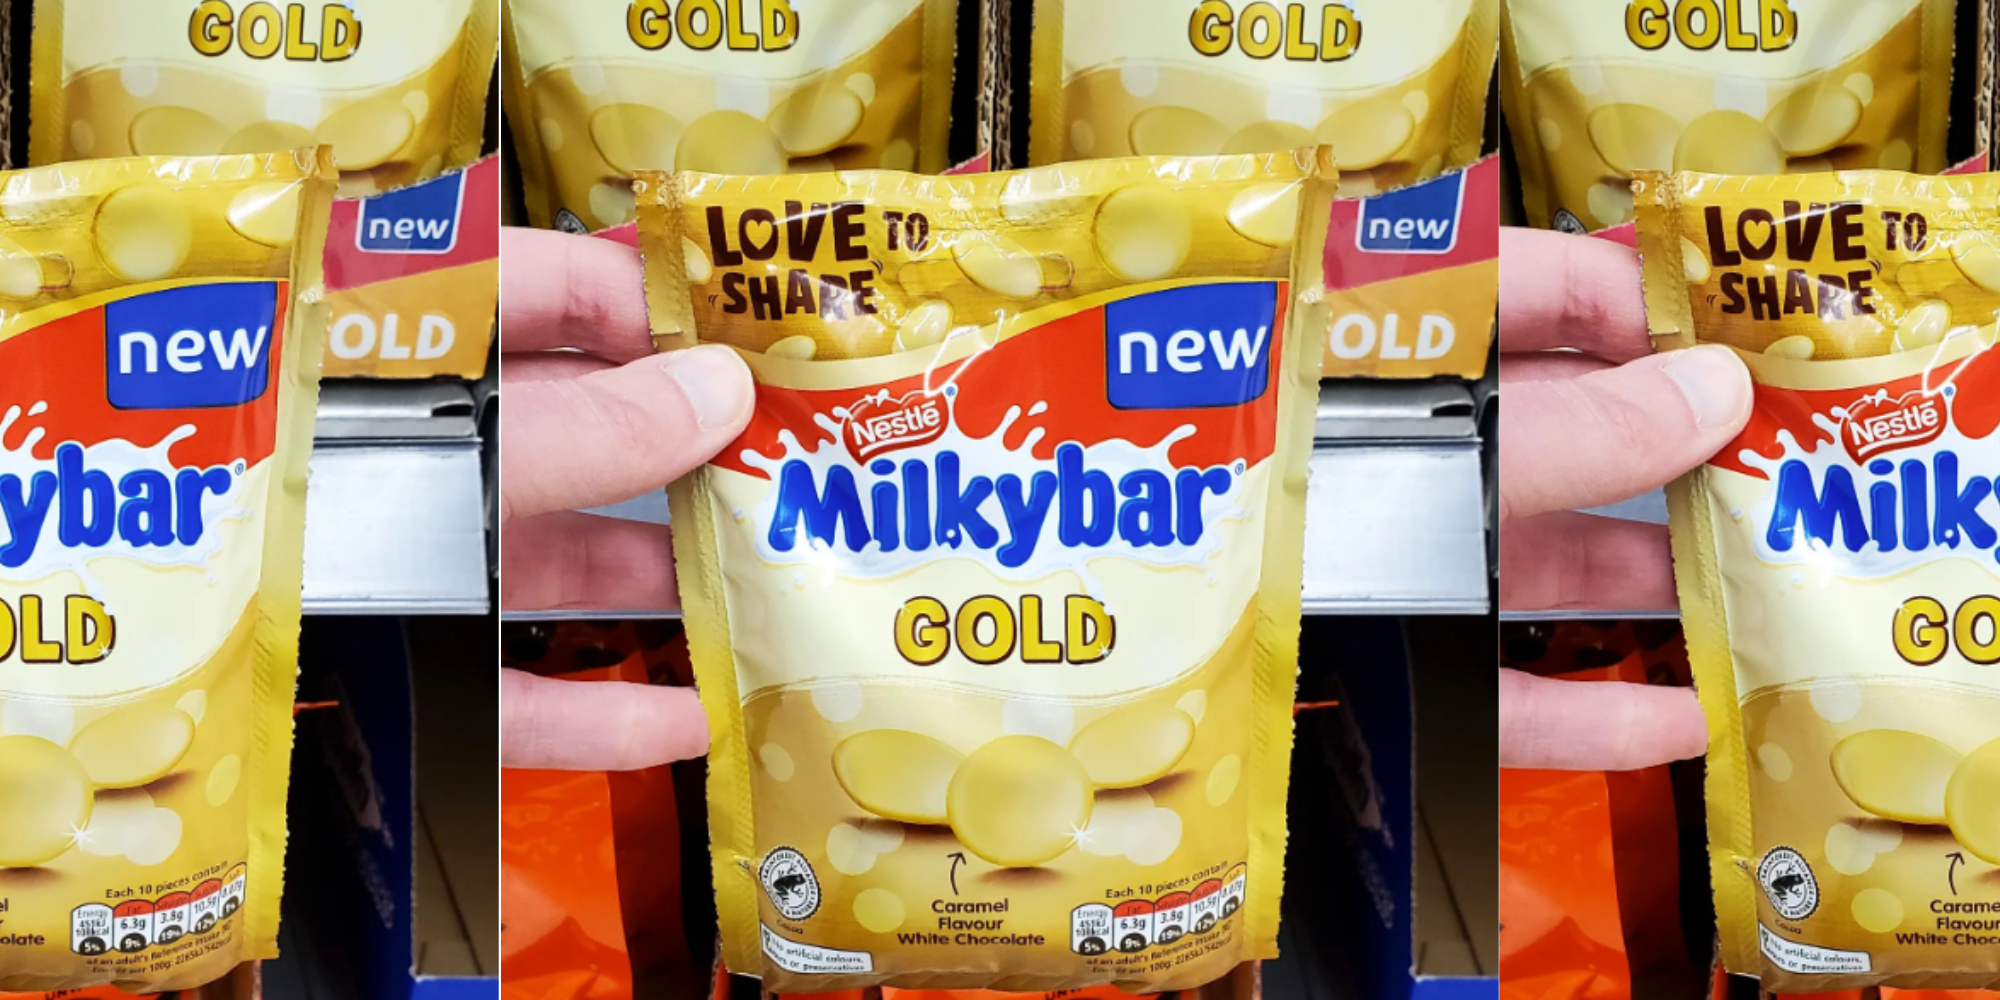 https://hips.hearstapps.com/hmg-prod/images/milkybar-gold-buttons-1677493591.png